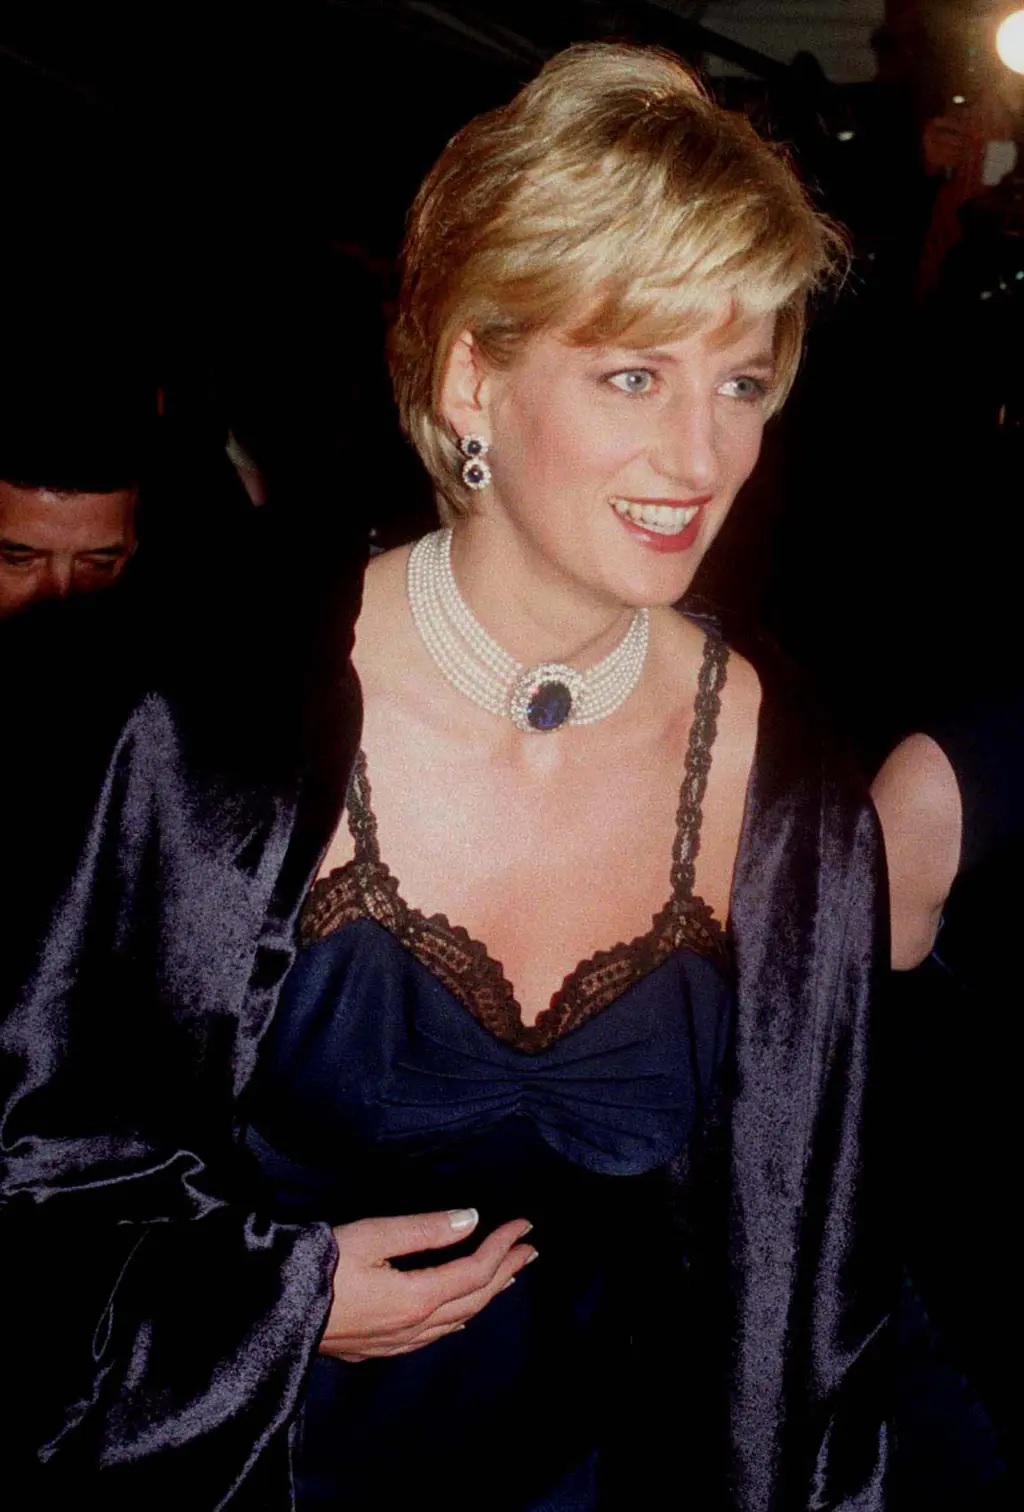 Why didn't Scotland Yard share the note on Princess Diana's fear that she would die in a staged car crash?